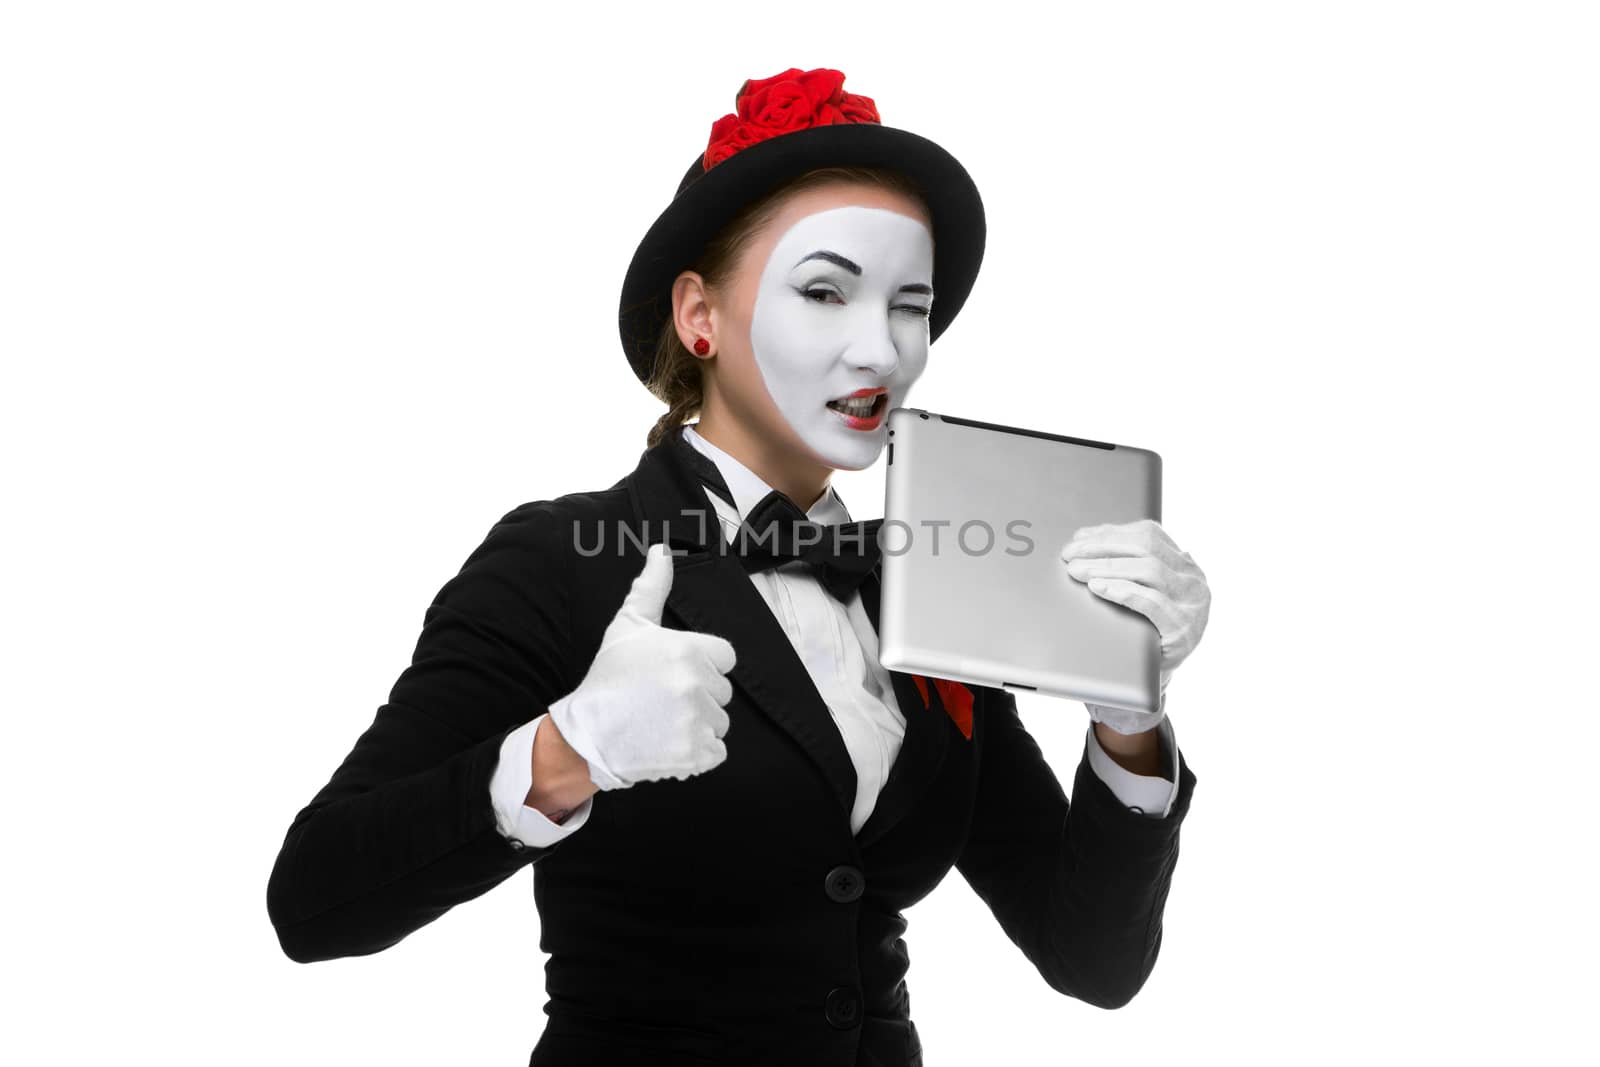 business woman in the image mime holding tablet PC and trying to tooth isolated on white background